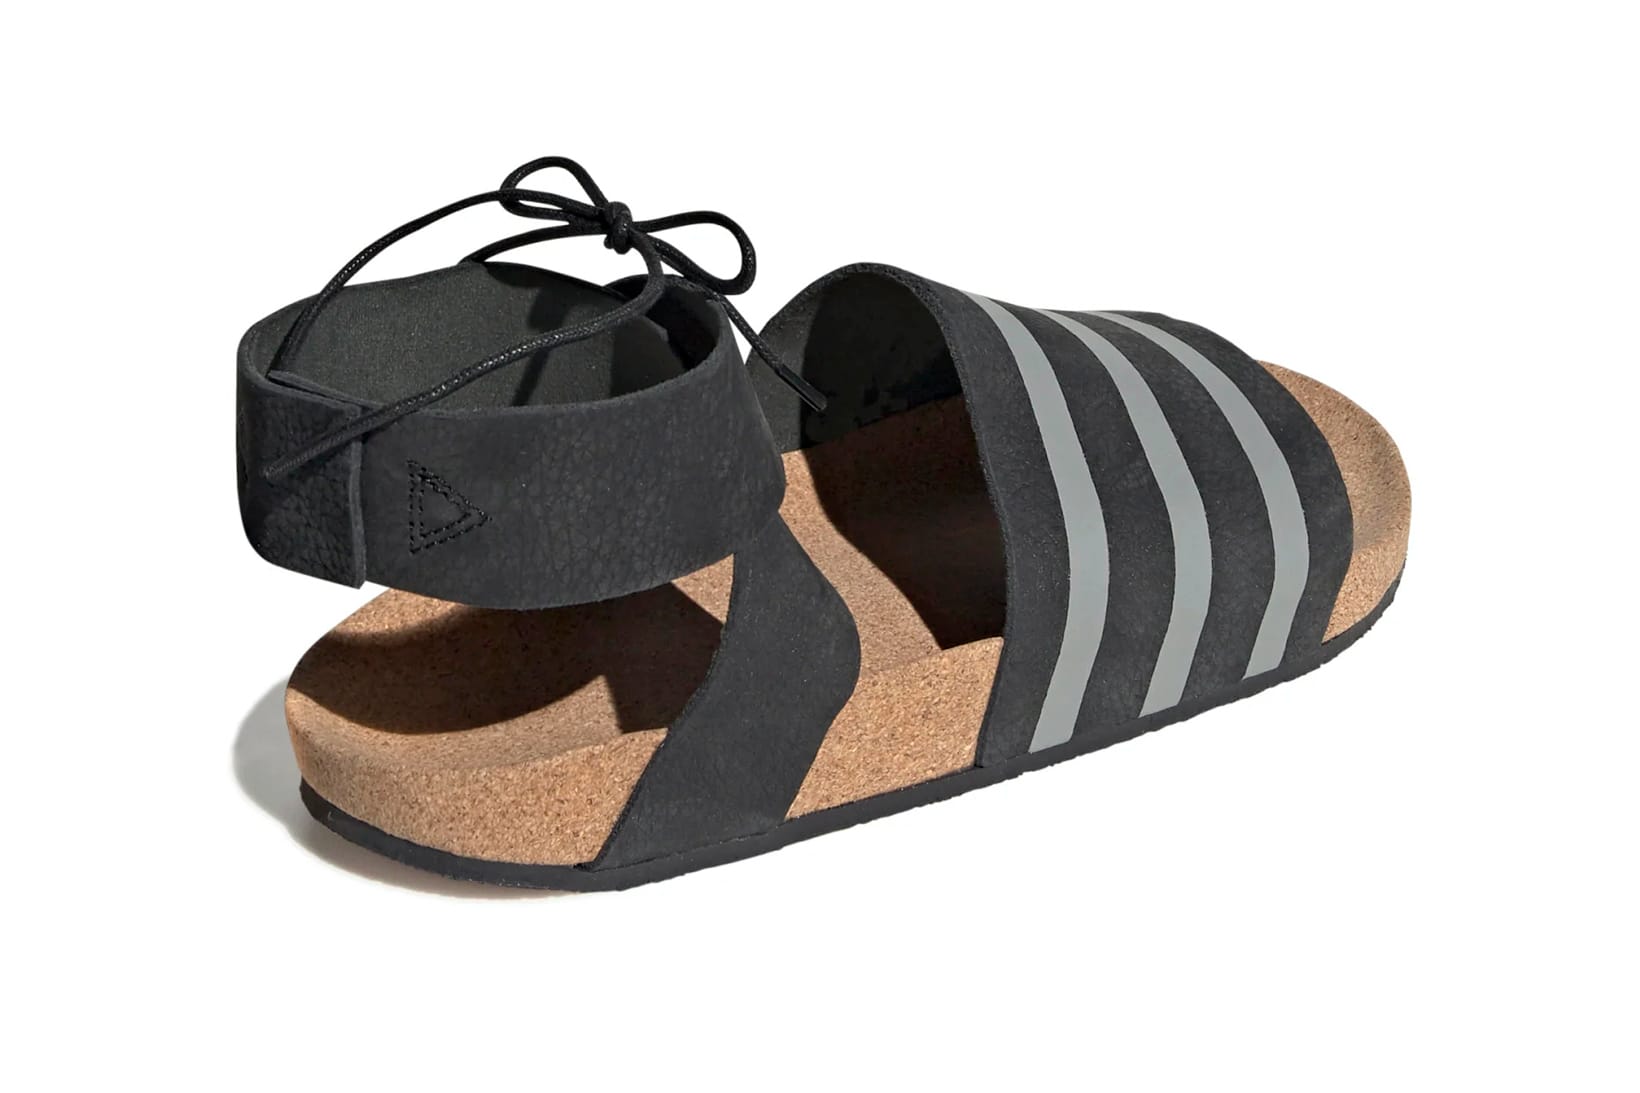 adidas originals adilette sliders with wrap ankle in black